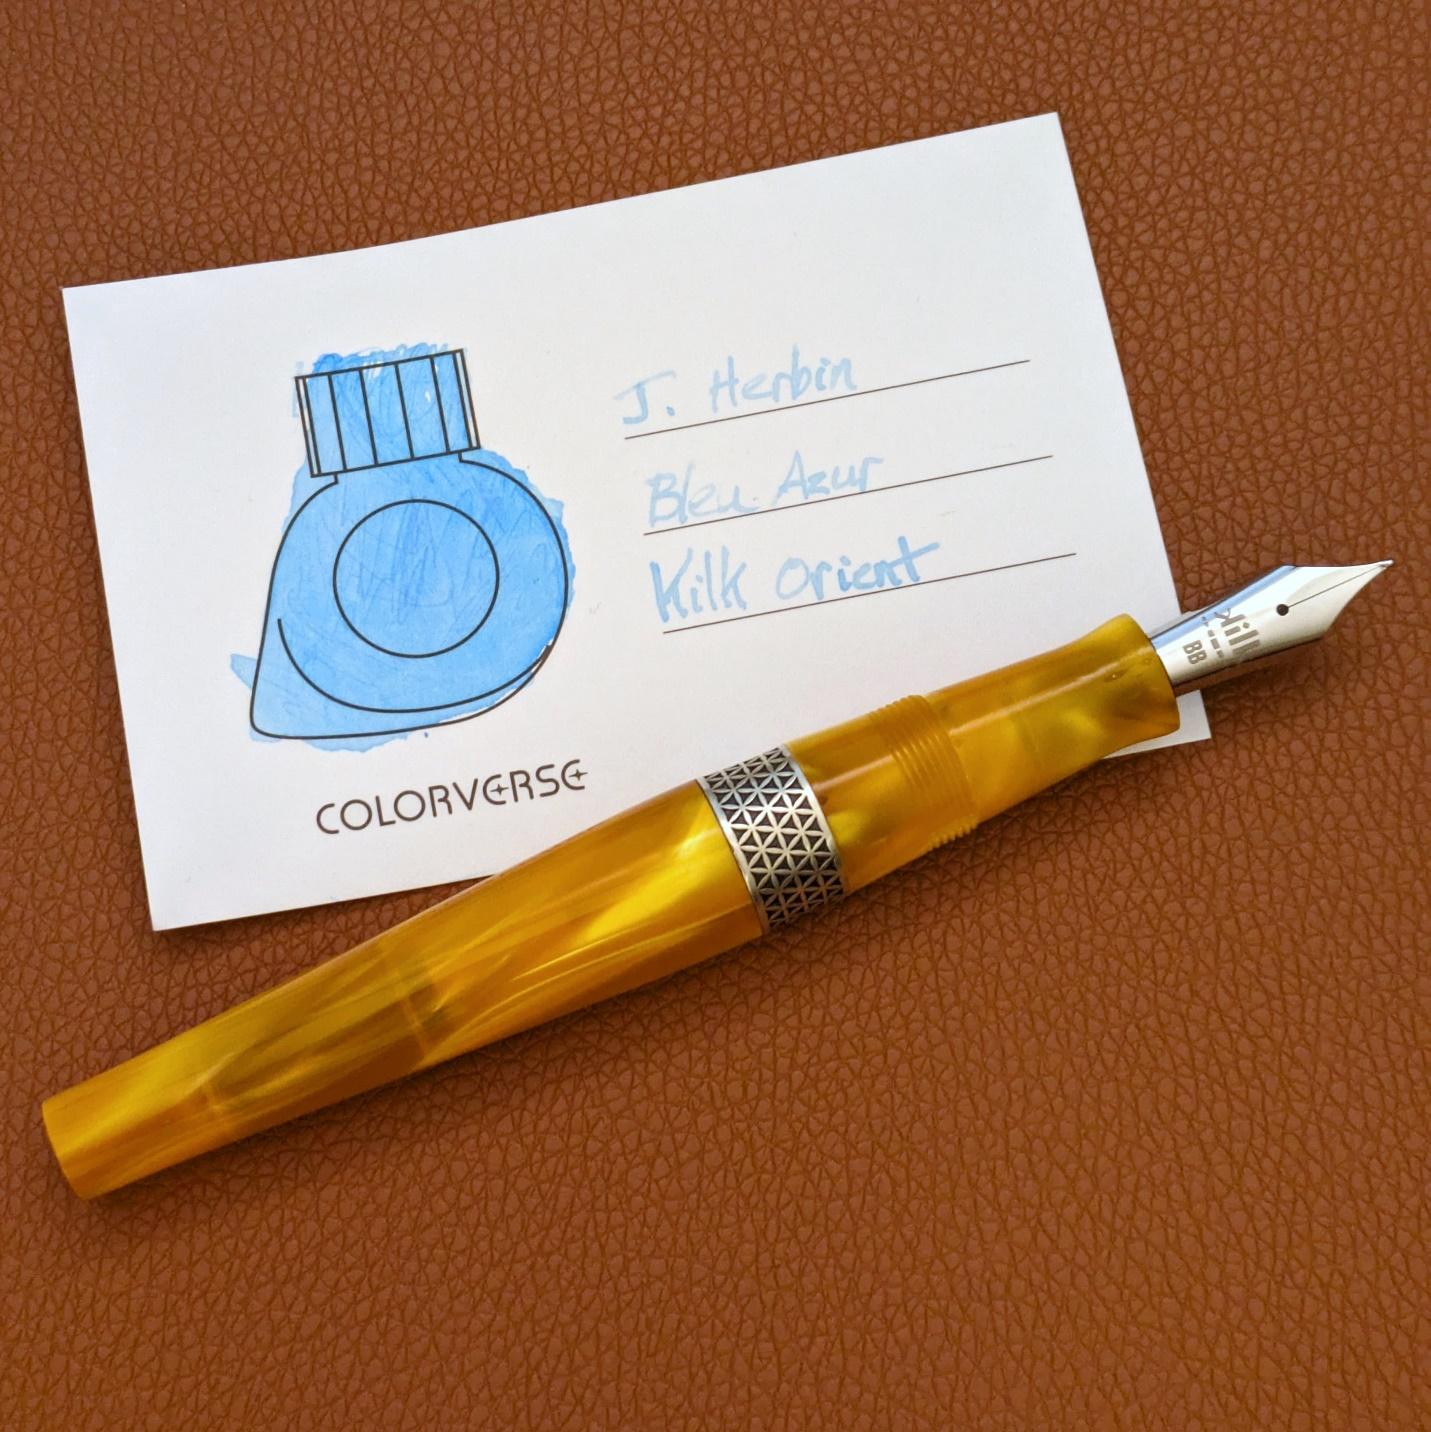 Kilk Orient double broad with J. Herbin Bleu Azur on a Colorverse ink swatch card